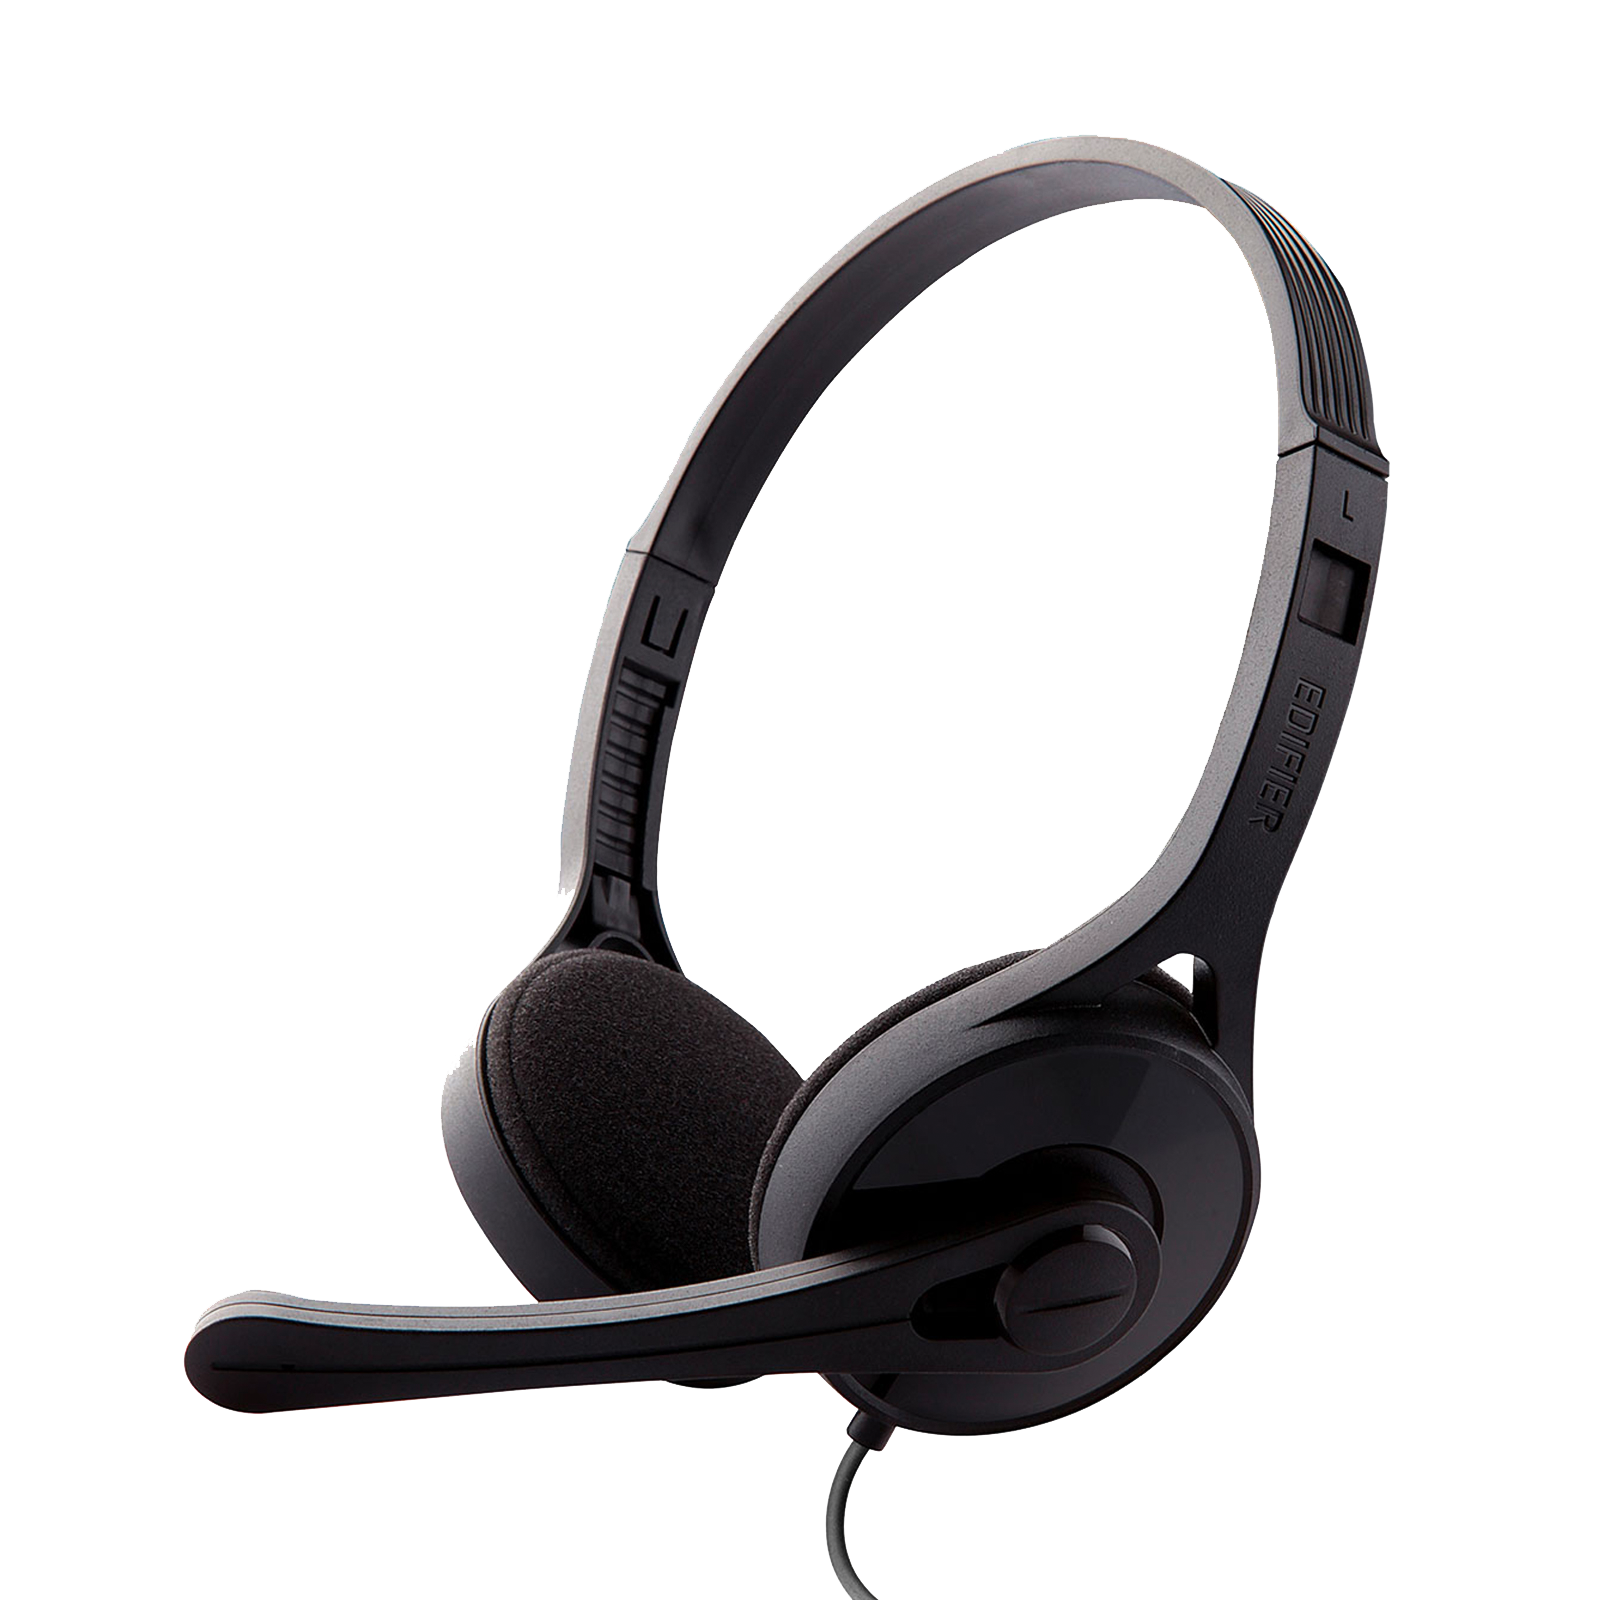 K550 Basic Computer Headset Crystal clear communication